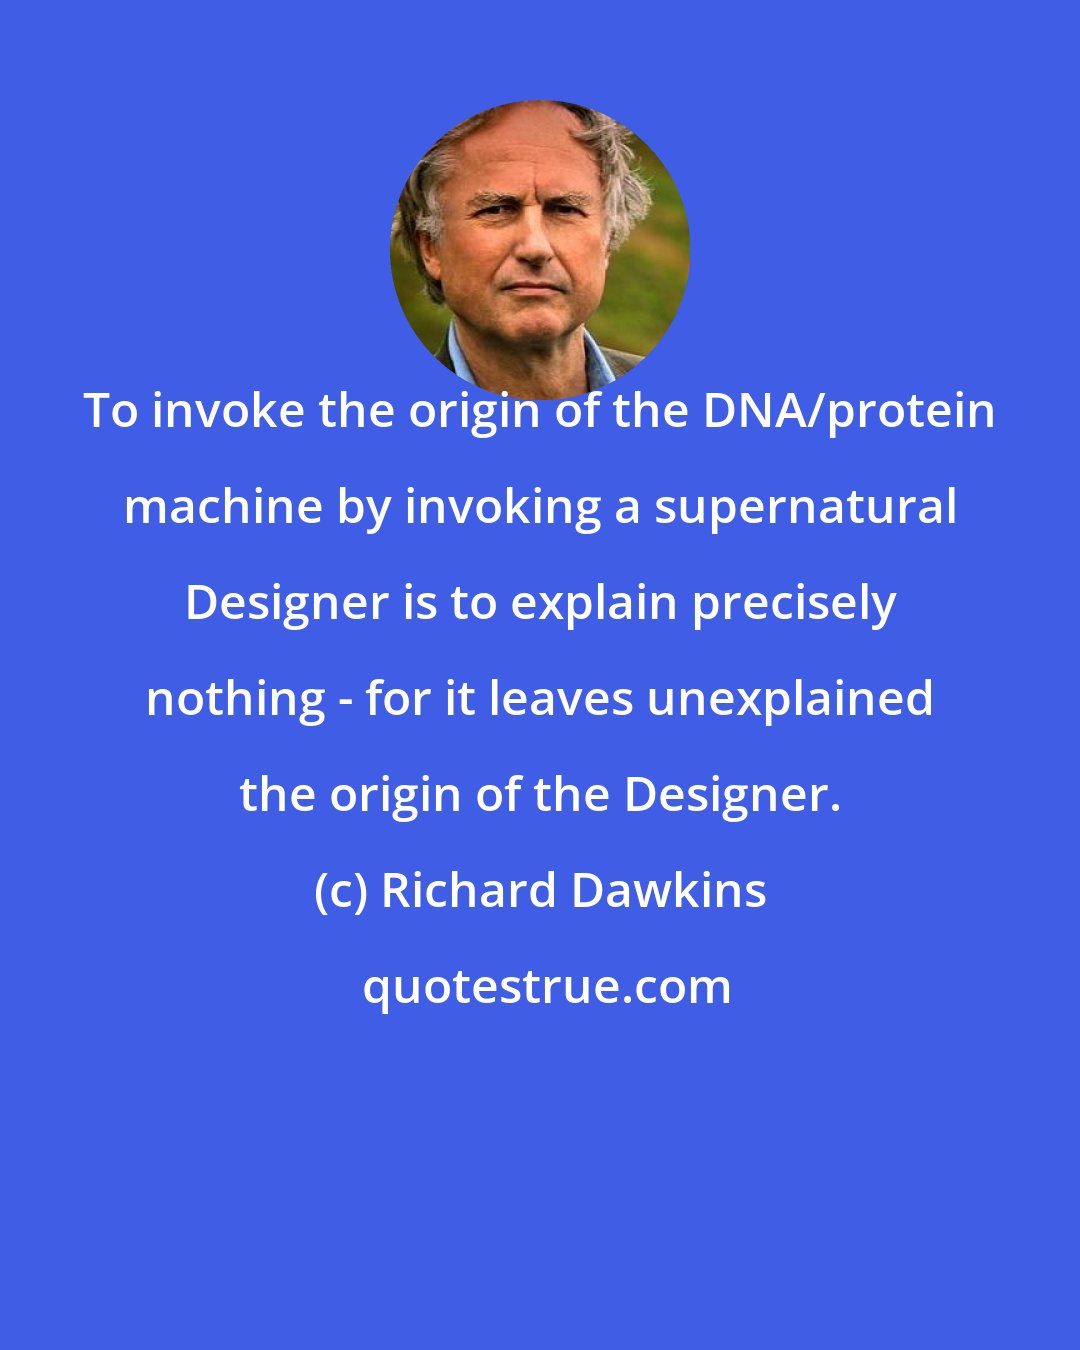 Richard Dawkins: To invoke the origin of the DNA/protein machine by invoking a supernatural Designer is to explain precisely nothing - for it leaves unexplained the origin of the Designer.